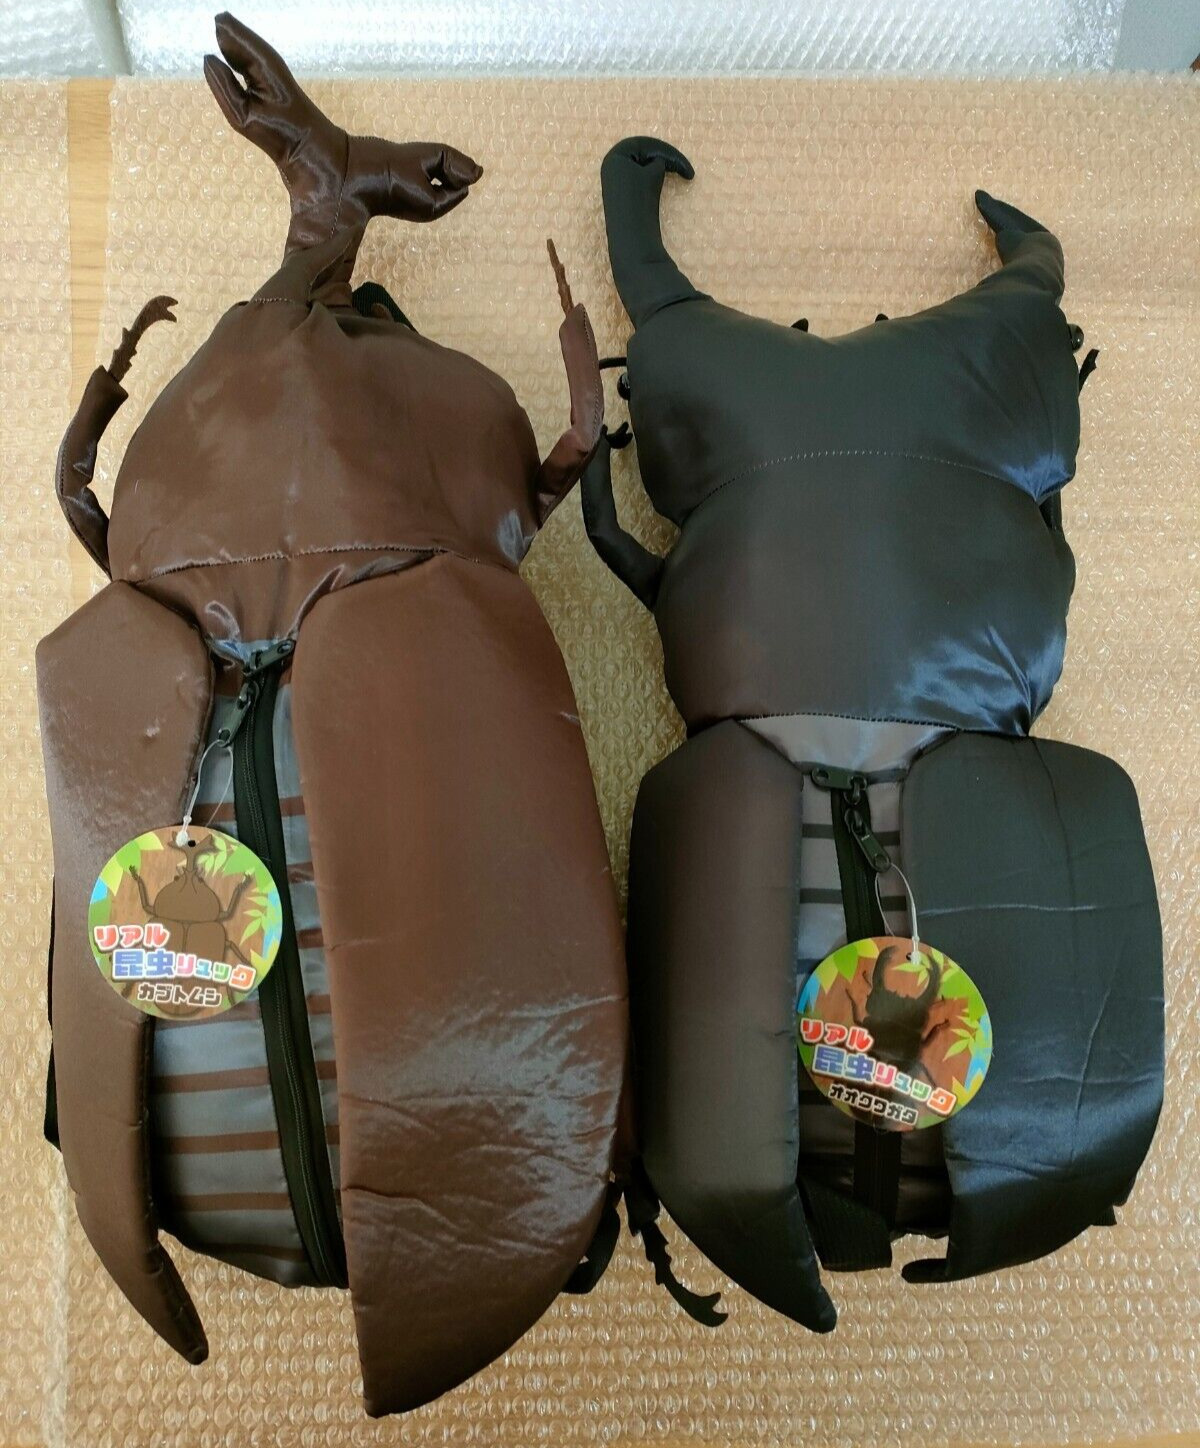 Real Insect Backpack Beetle Giant Stag Beetle Bag Big Plush Set H 55cm With Tag